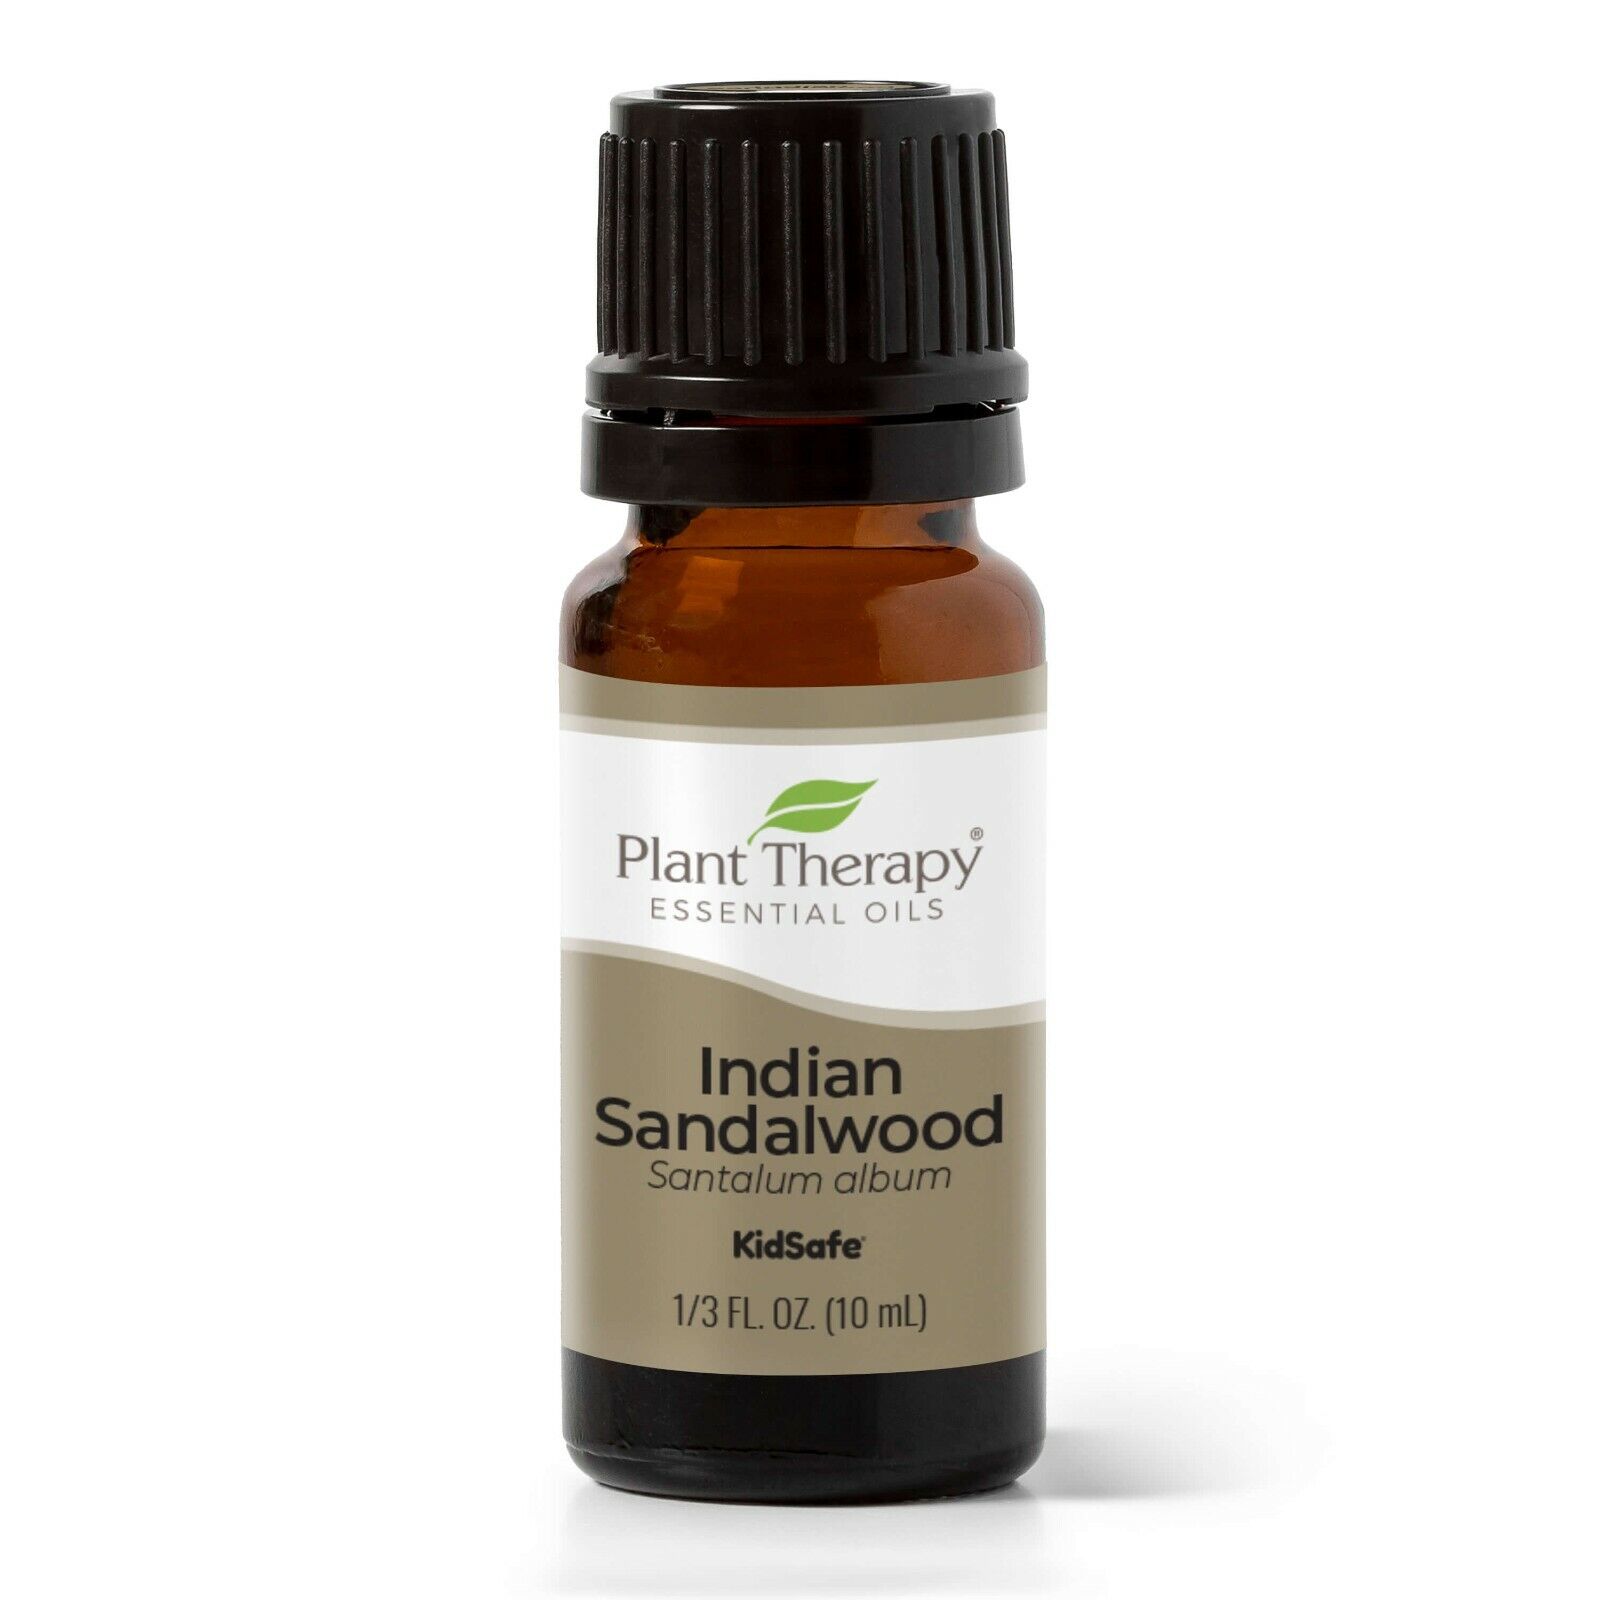 Plant Therapy Indian Sandalwood Essential Oil 100% Pure, Undiluted, Natural